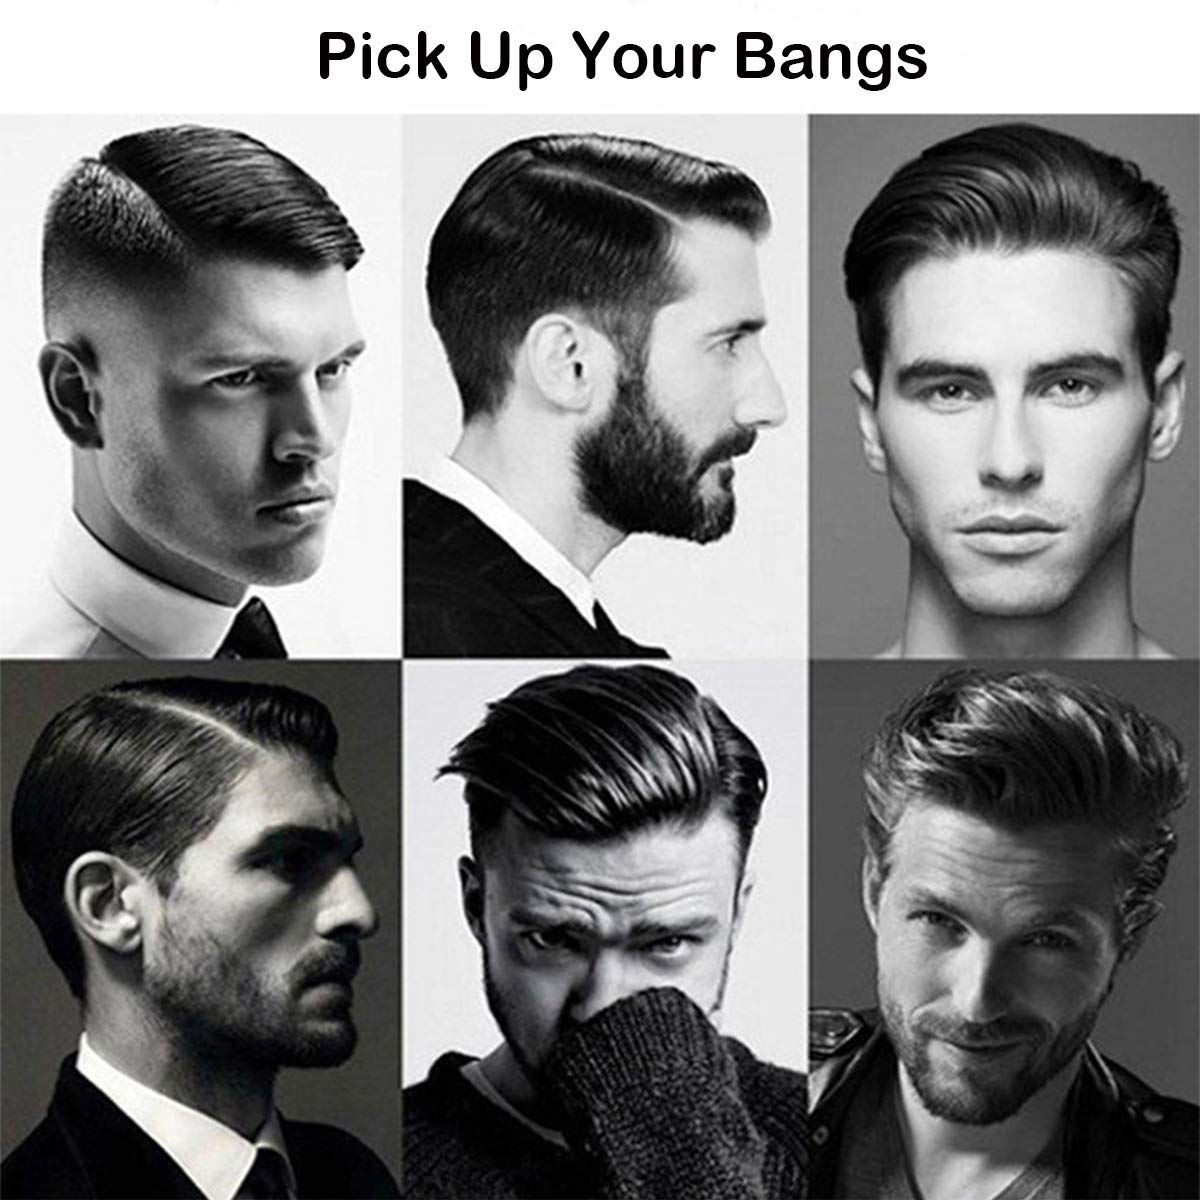 Amelar 5 PCS Hair Comb Styling Set Barber Hairstylist Accessories,Professional Shaping & Wet Pick Barber Brush Tools, Anti-Static Hair Brush for Men Boys